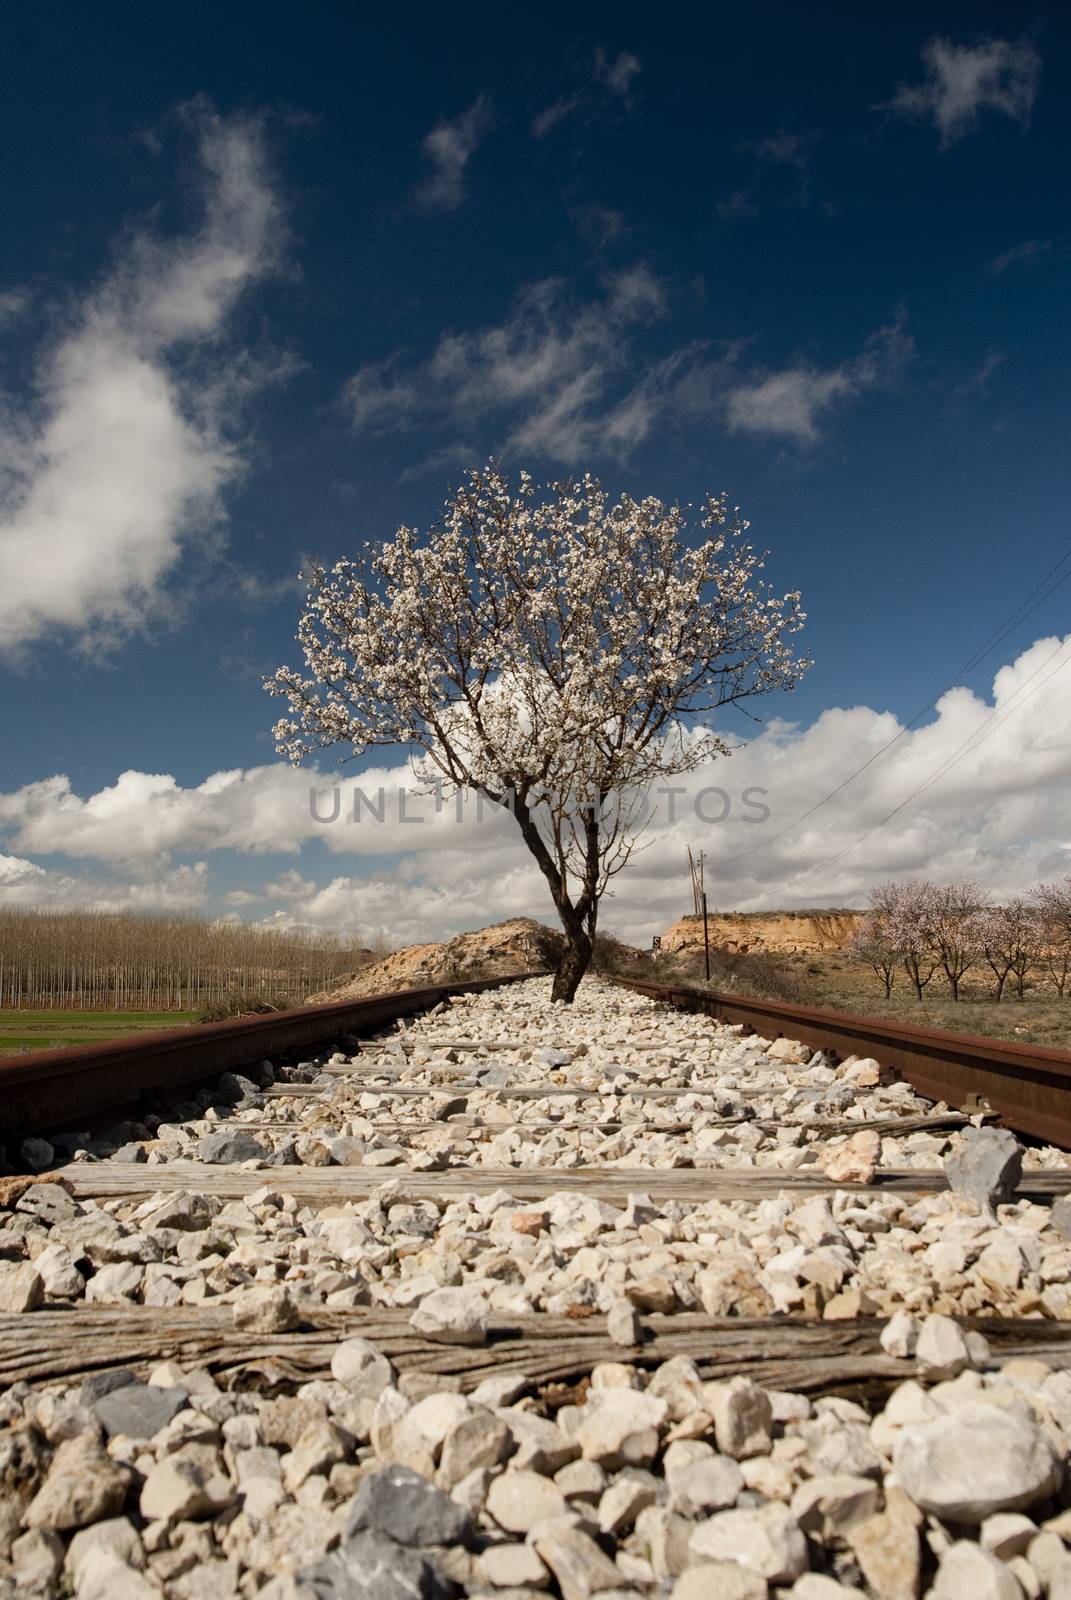 Almond tree in flower occupying some old railroad tracks